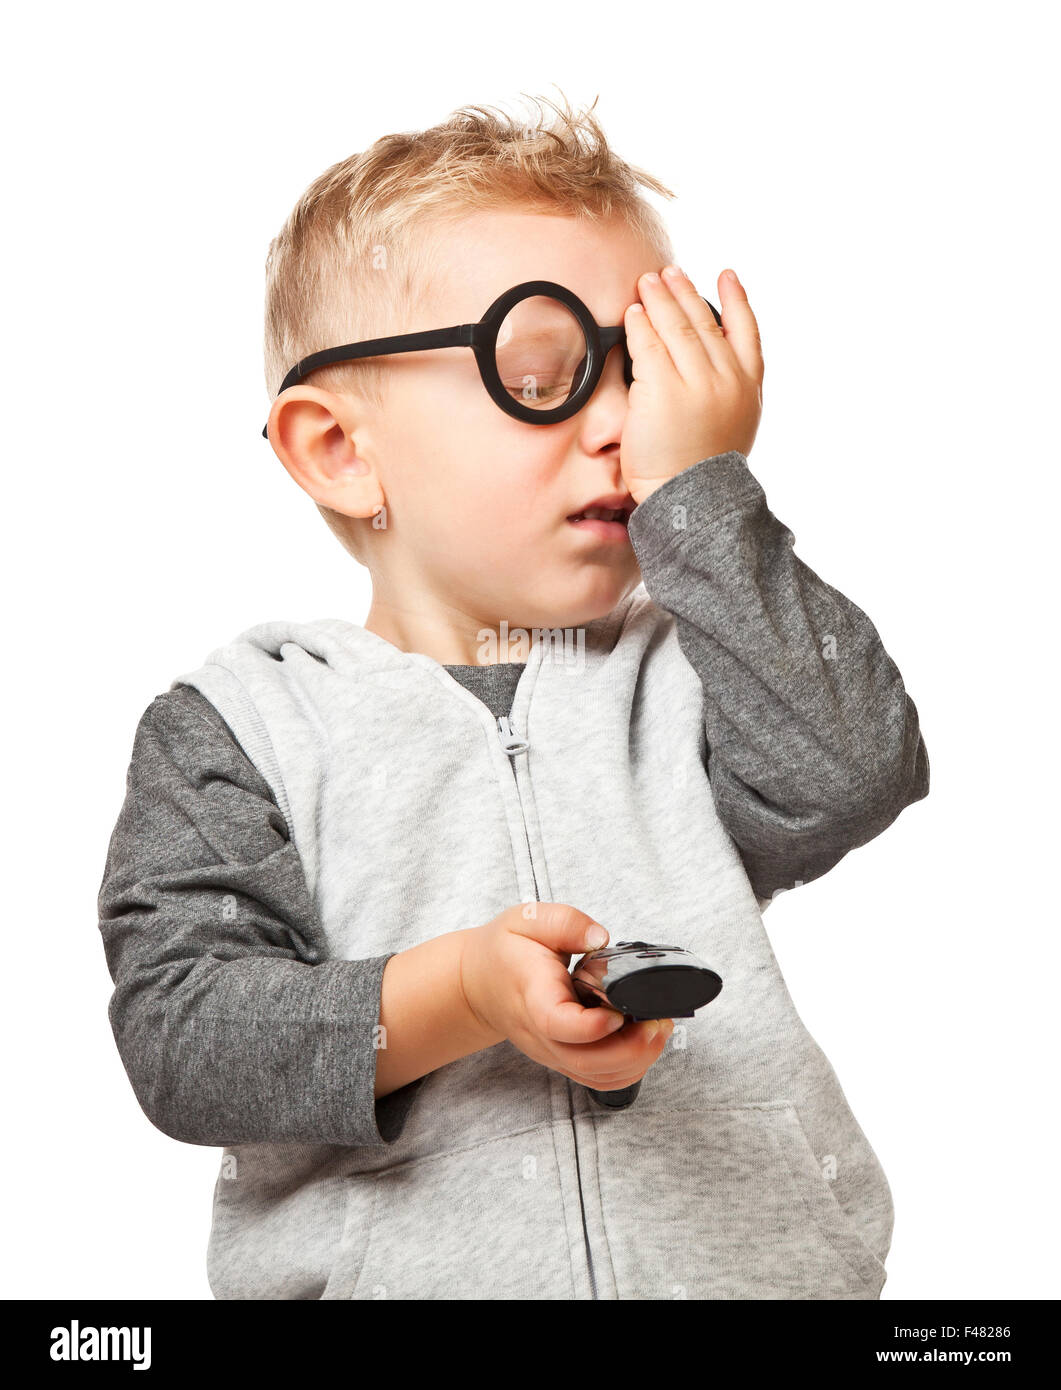 child with remote control and funny glasses Stock Photo